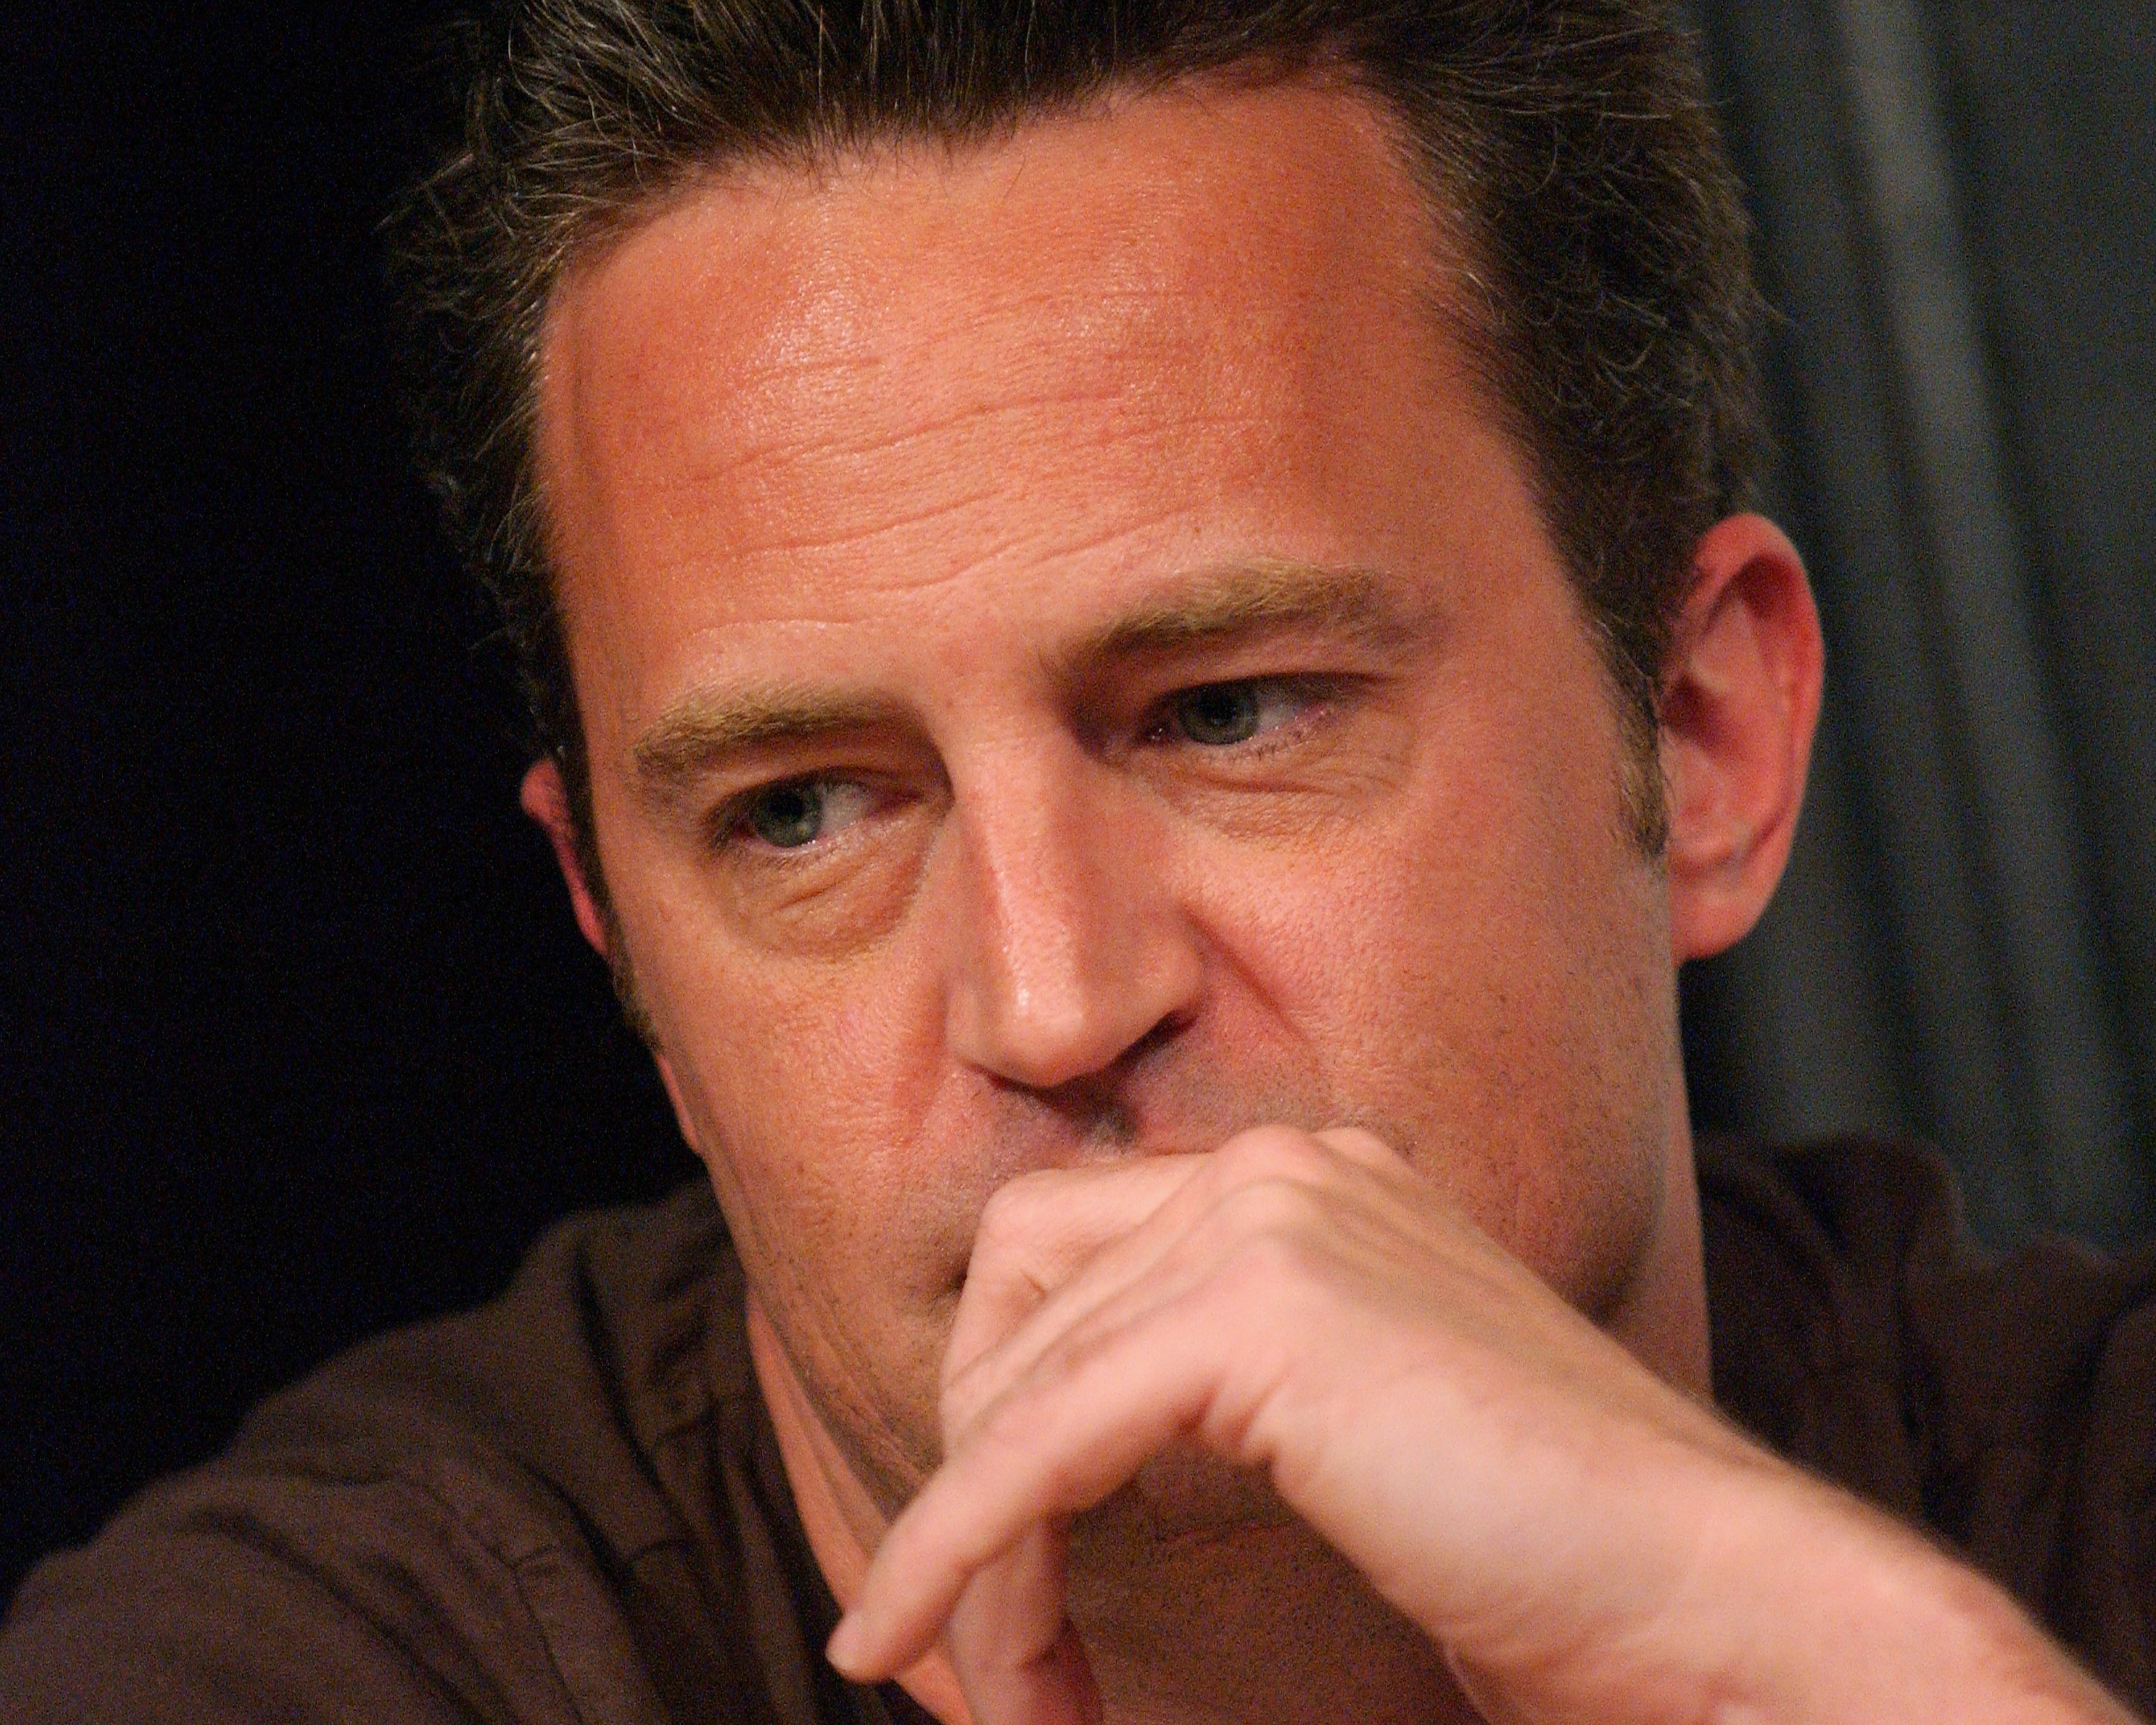 HOLLYWOOD - NOVEMBER 09: Mathew Perry plays The Match Game at The UCB Theatre on November 9, 2007 in Hollywood, CA. | Source: Getty Images